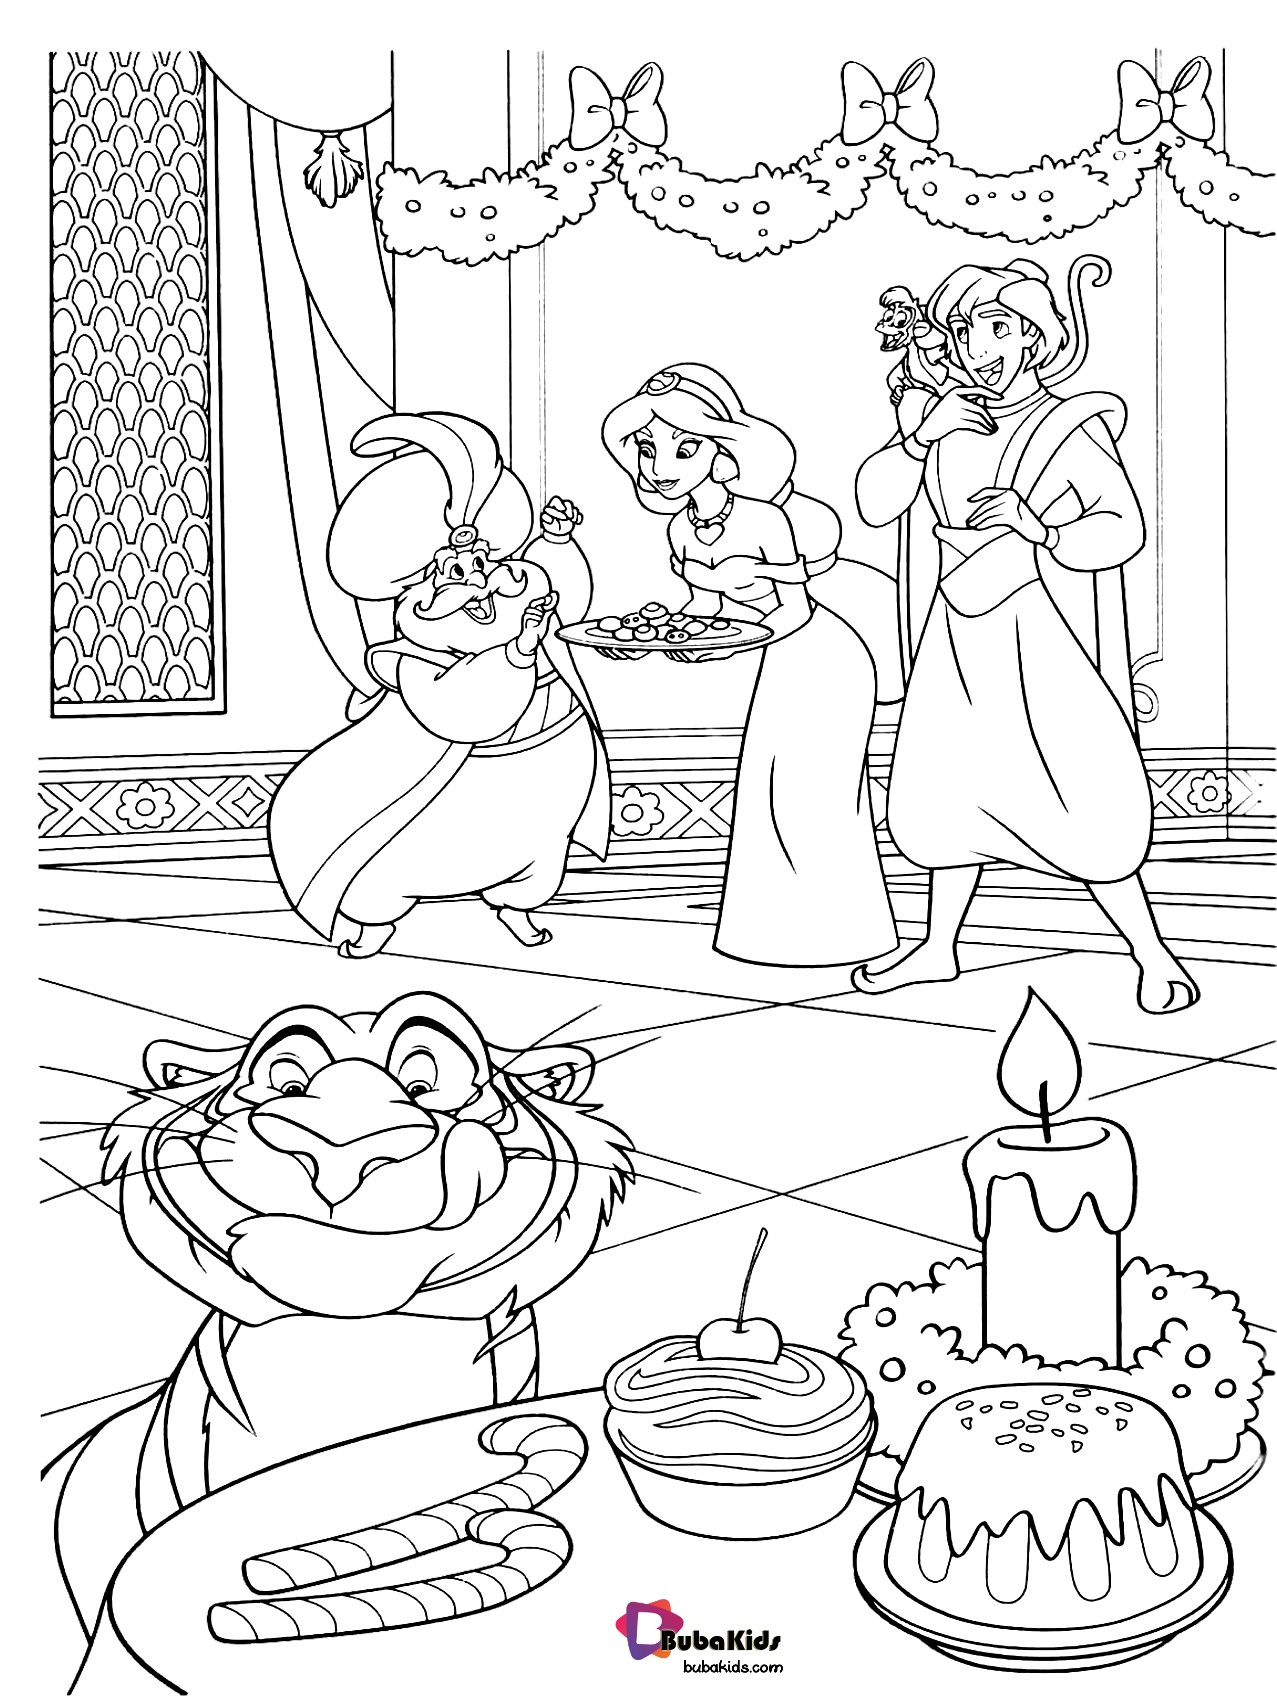 Free download to print Aladdin coloring page. Wallpaper